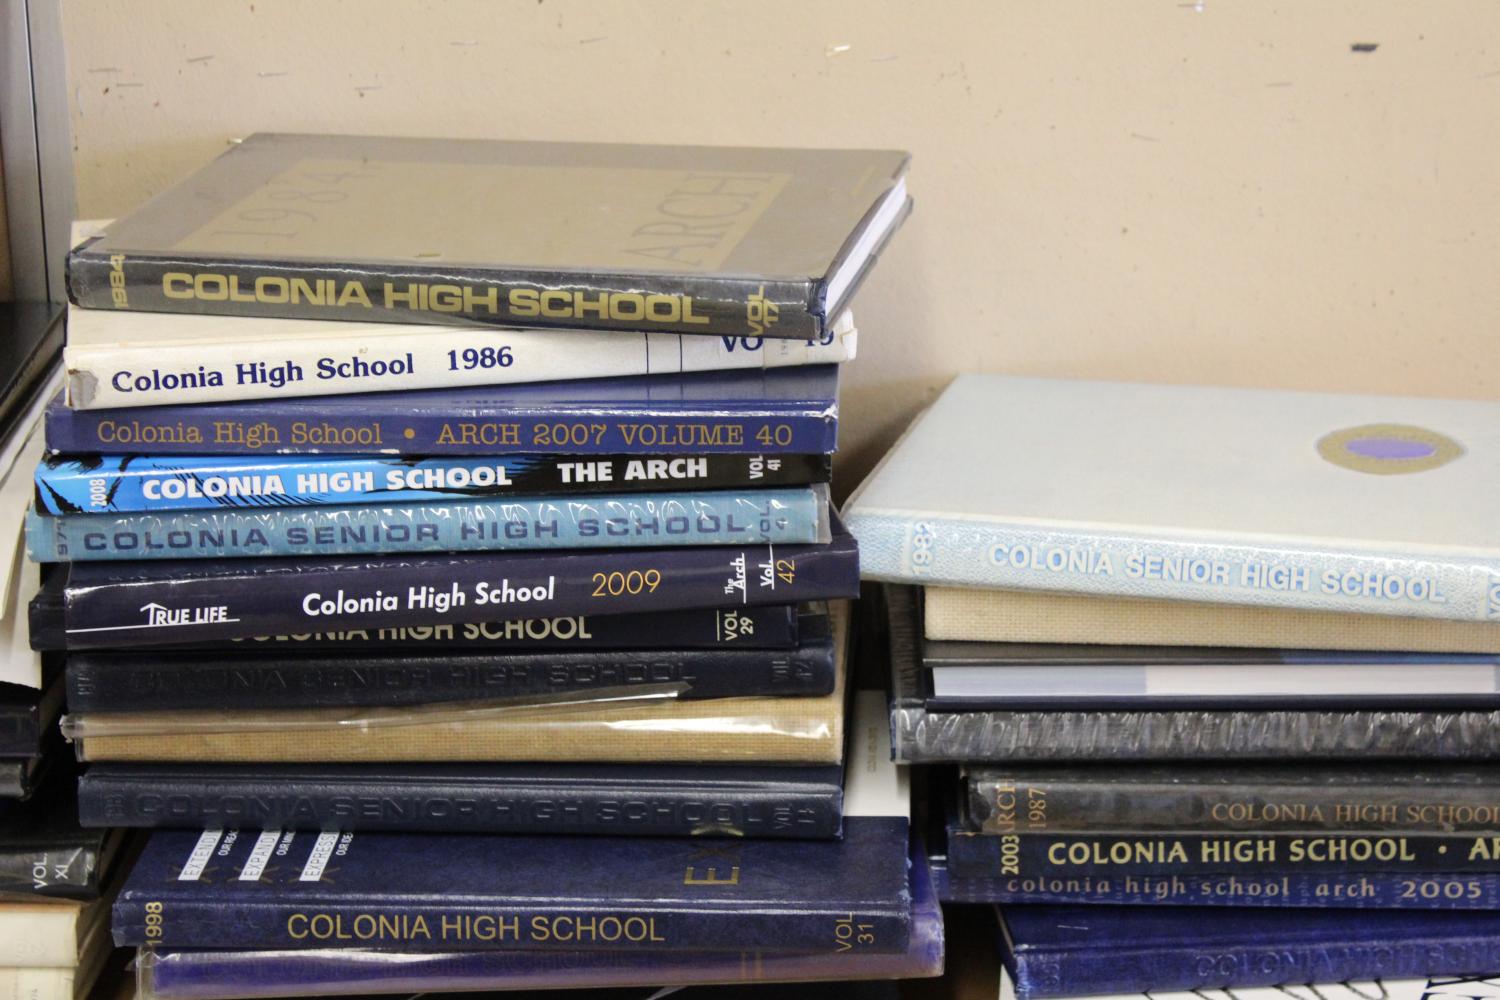 The+previous+Colonia+High+School+yearbooks